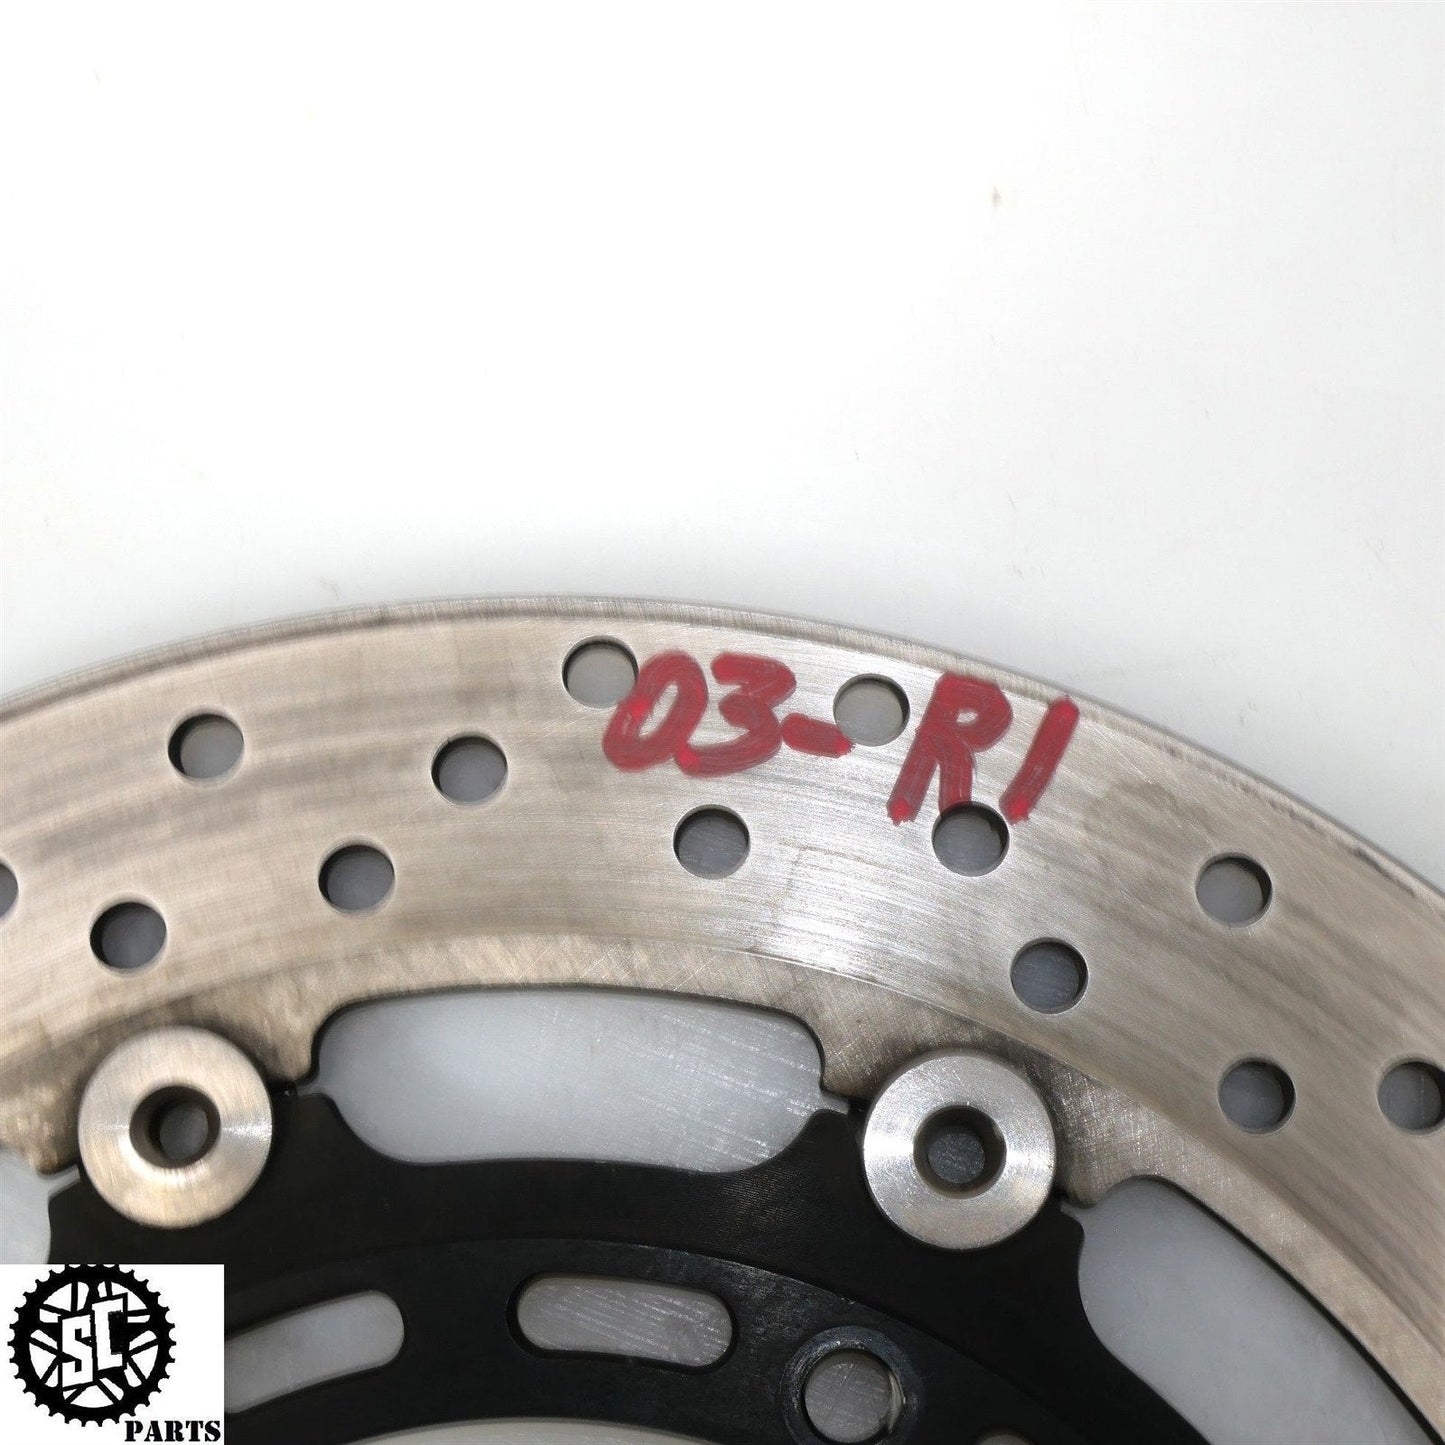 2002 2003 YAMAHA YZF R1 FRONT BRAKE ROTORS LOW MILES LEFT RIGHT Y07